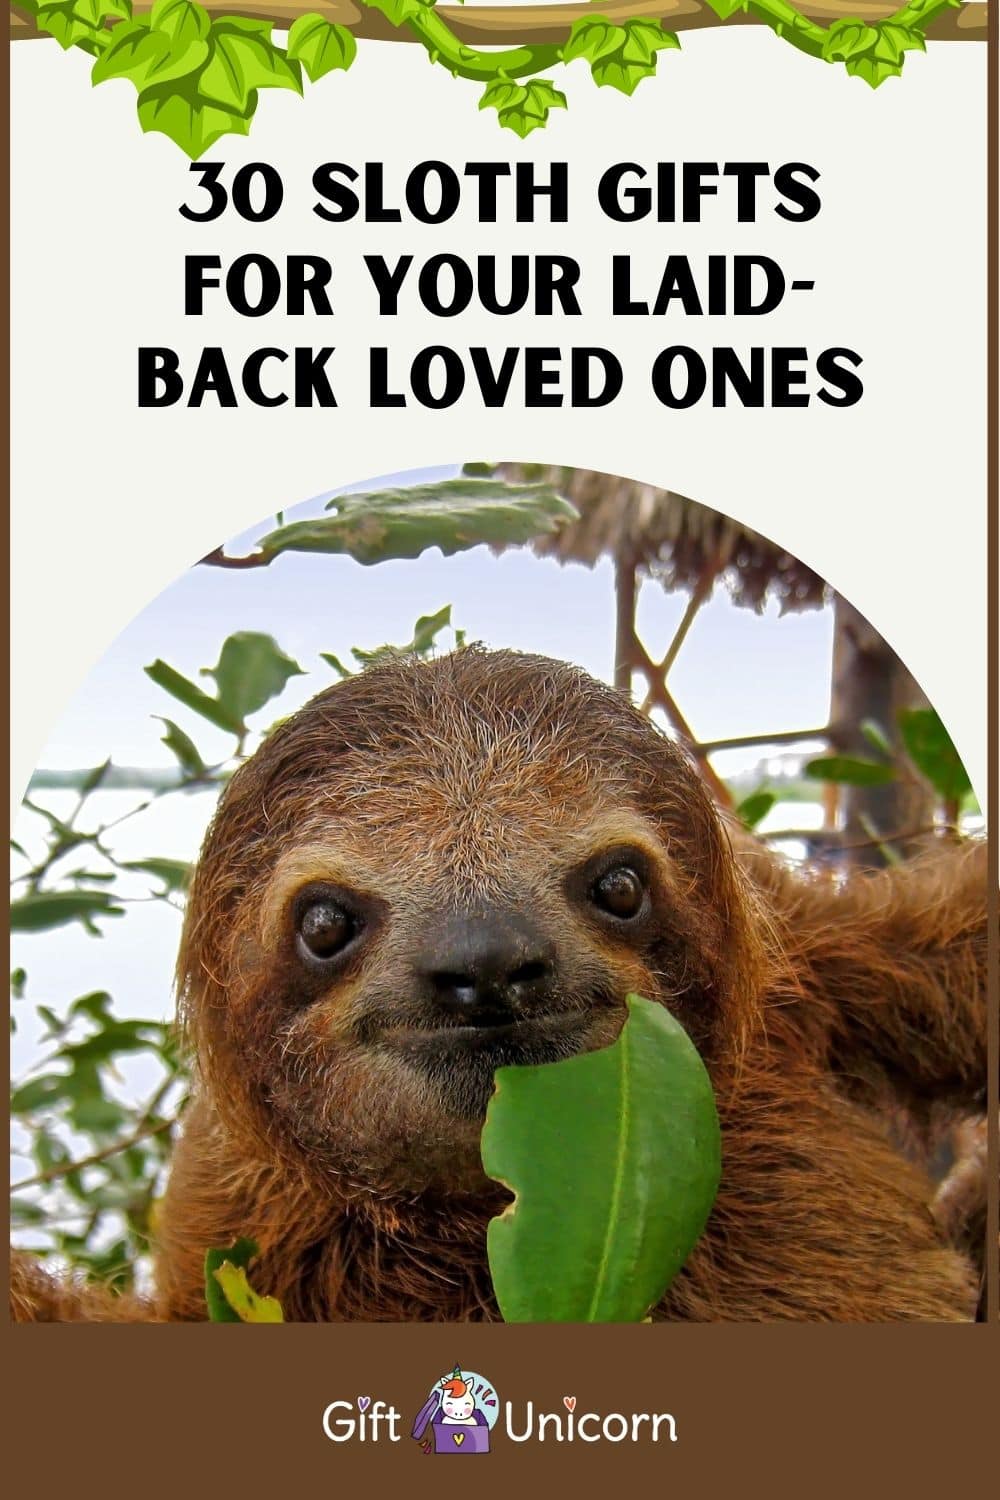 30 Sloth Gifts for Your Laid-Back Loved Ones - pinterest pin image